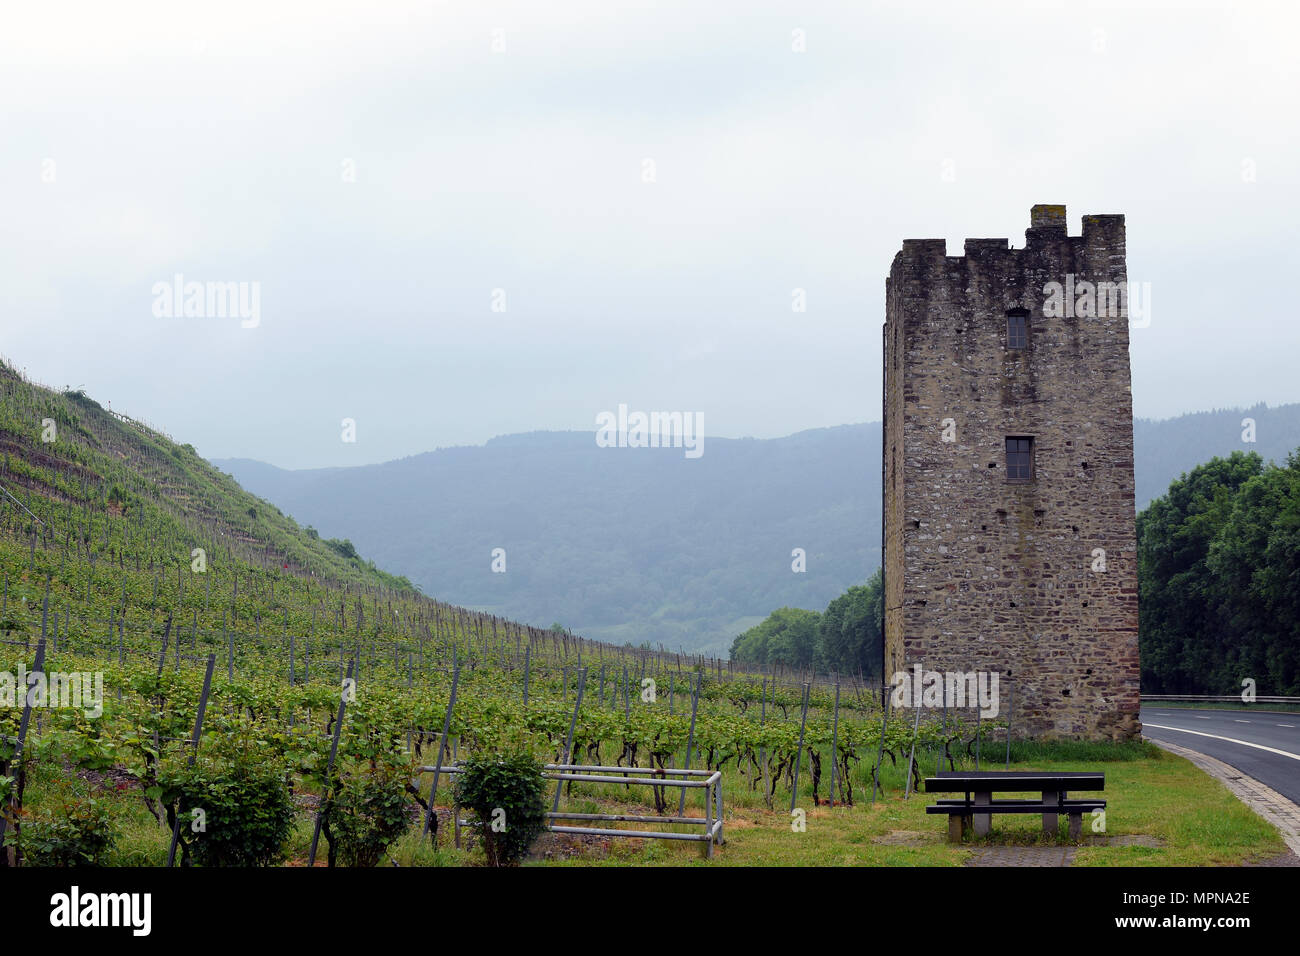 Vineyards in Moselle Valley, Germany. Stock Photo